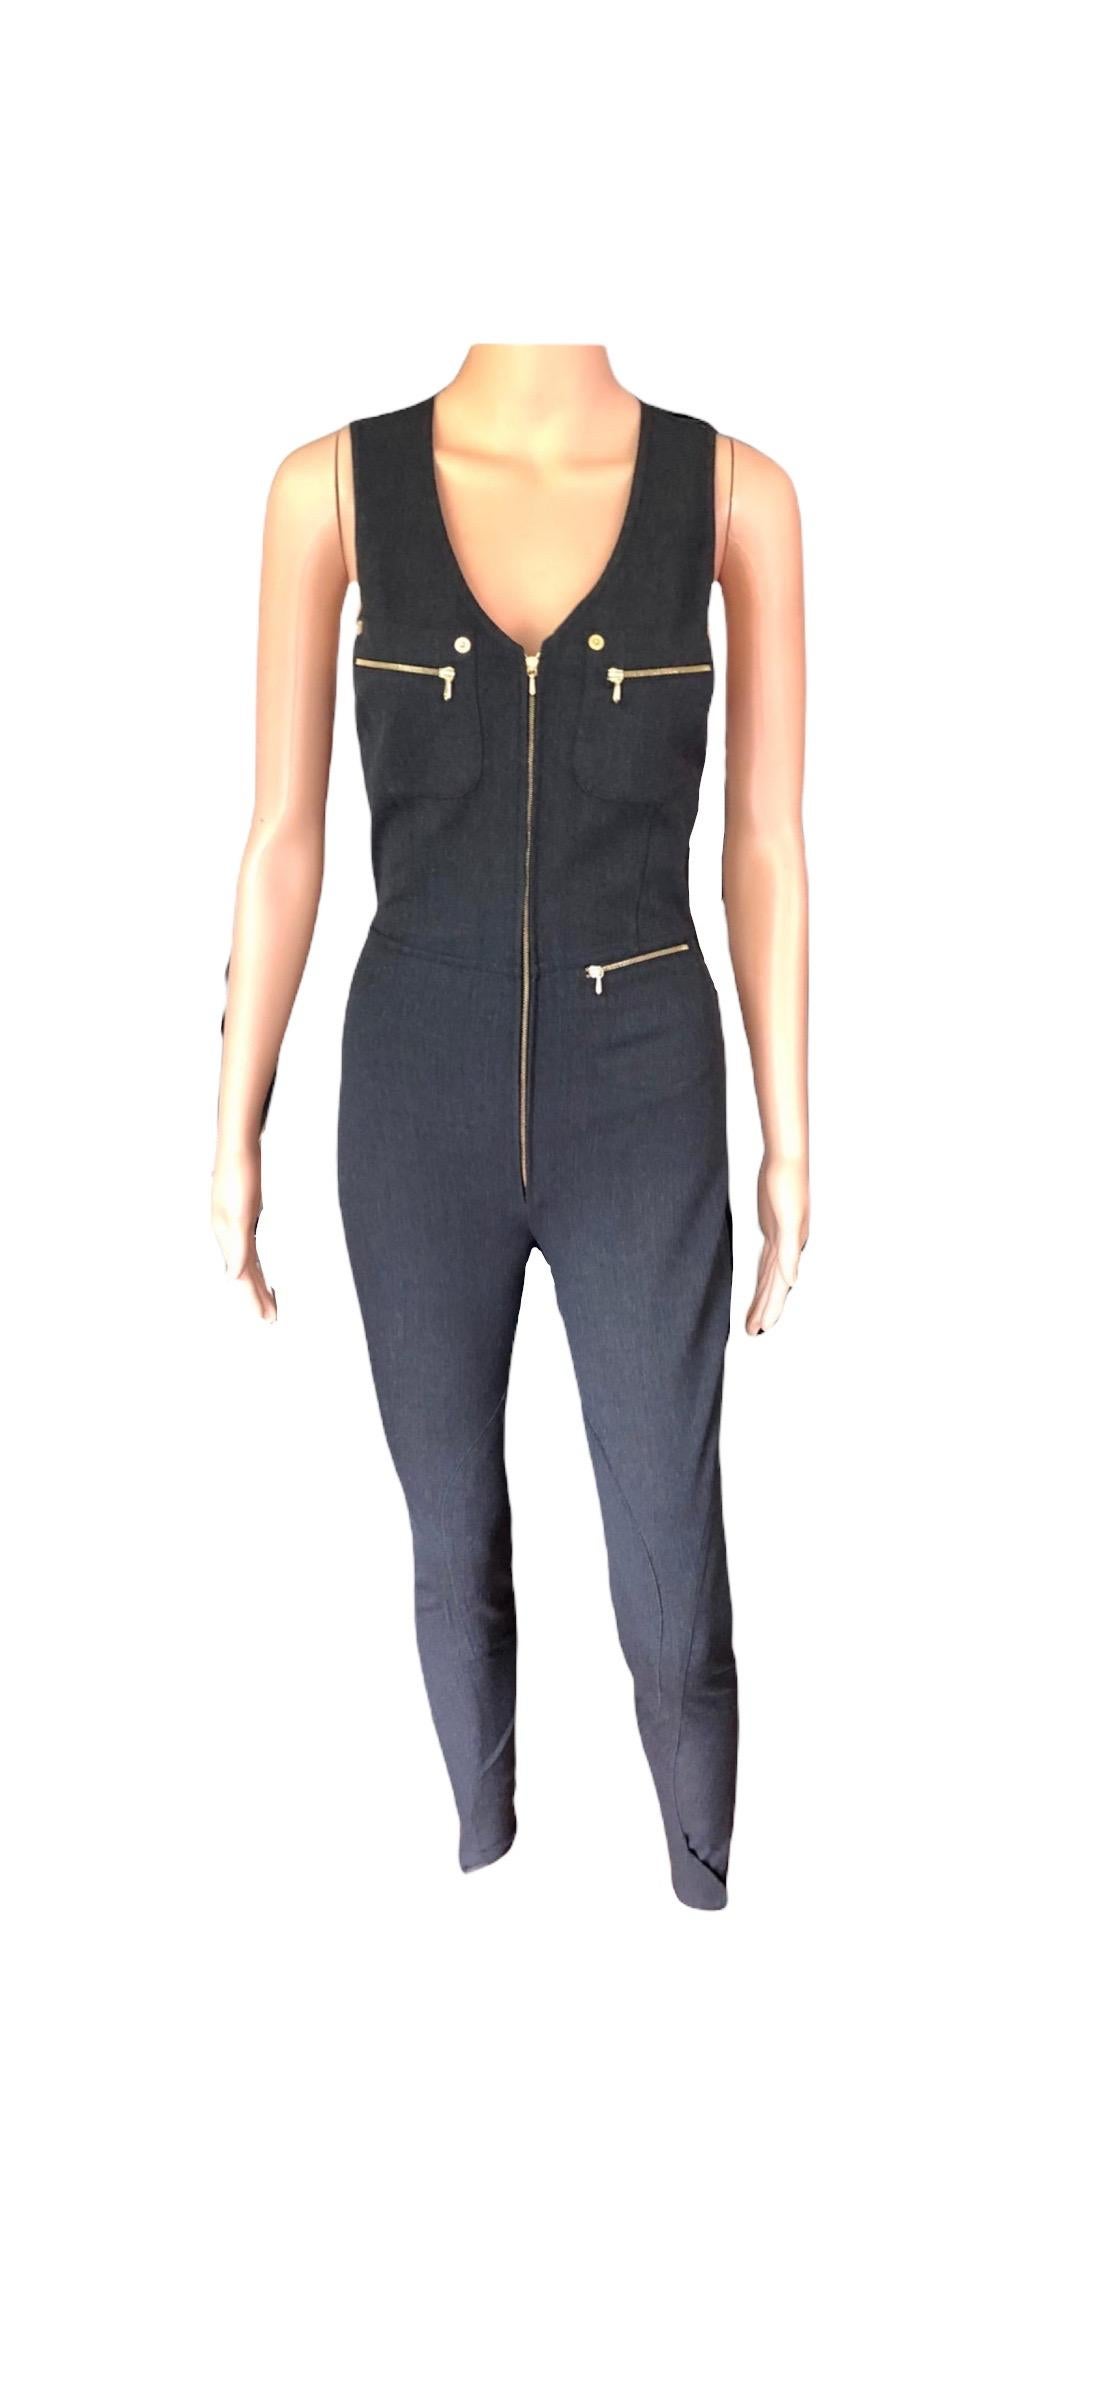 Tom Ford for Gucci S/S 1993 Runway Vintage Zipper Jumpsuit For Sale 3